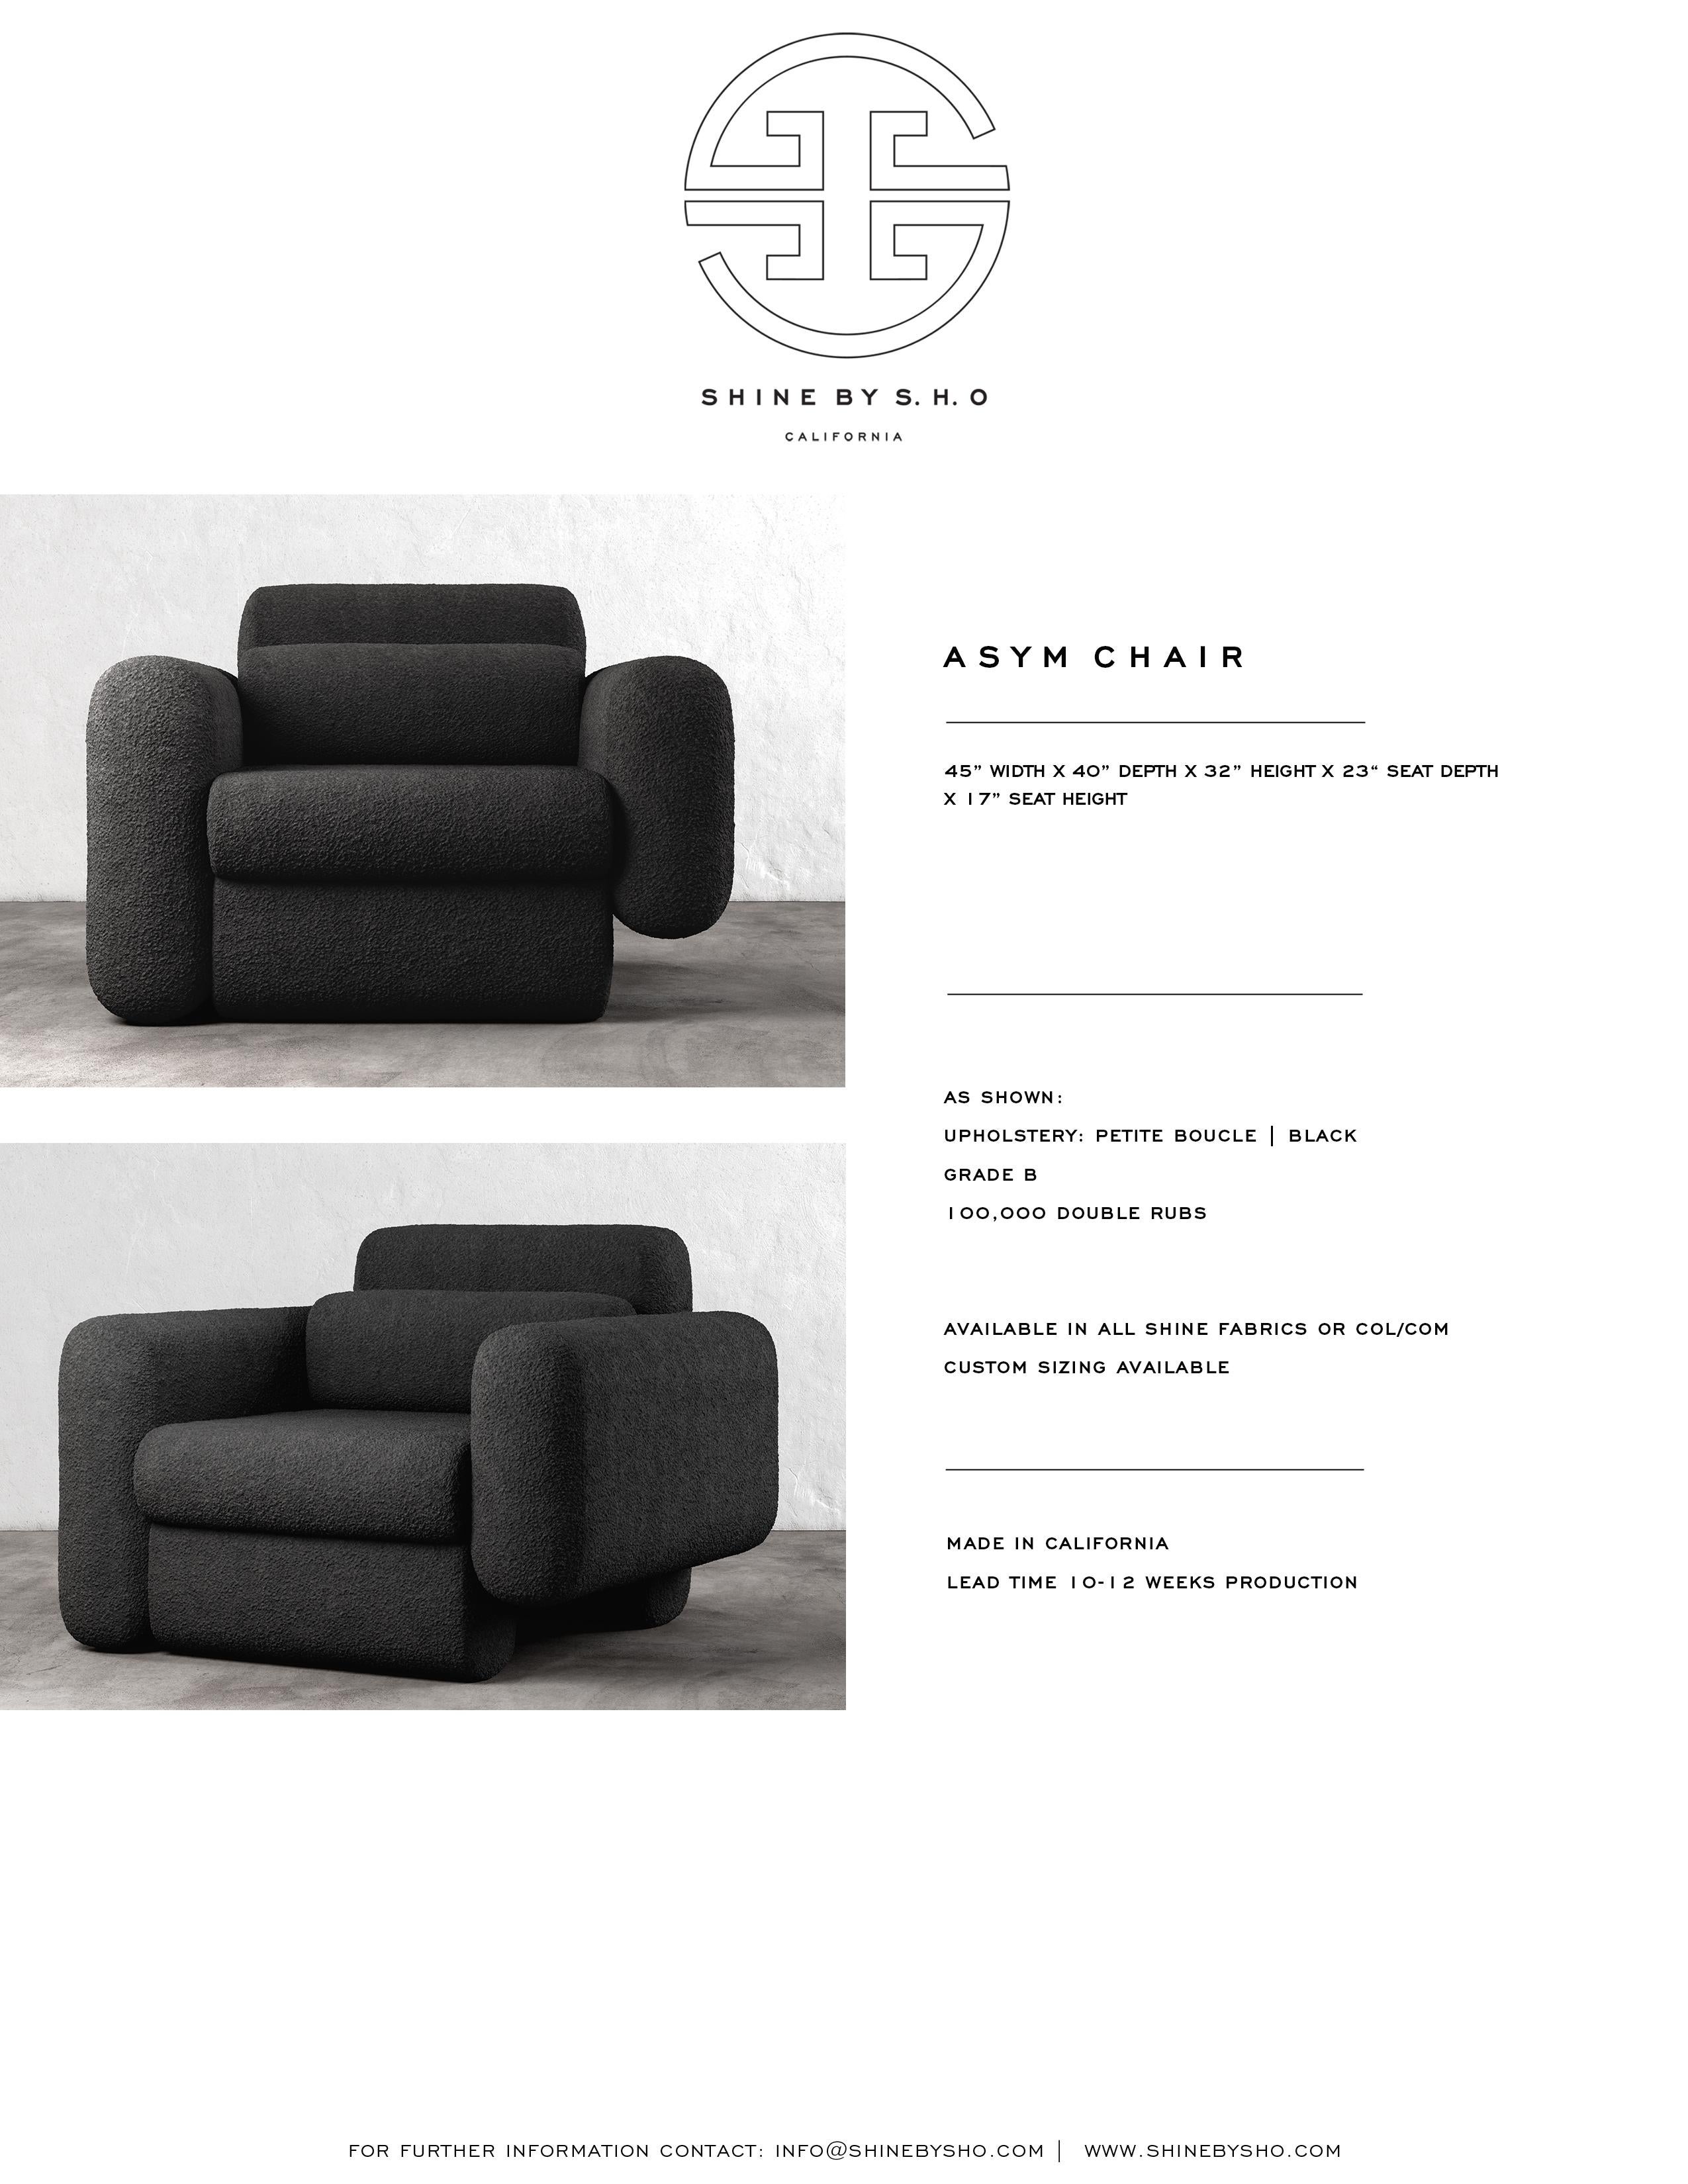 Contemporary ASYM CHAIR - Modern Asymmetrical Sectional Chair in Black Boucle For Sale